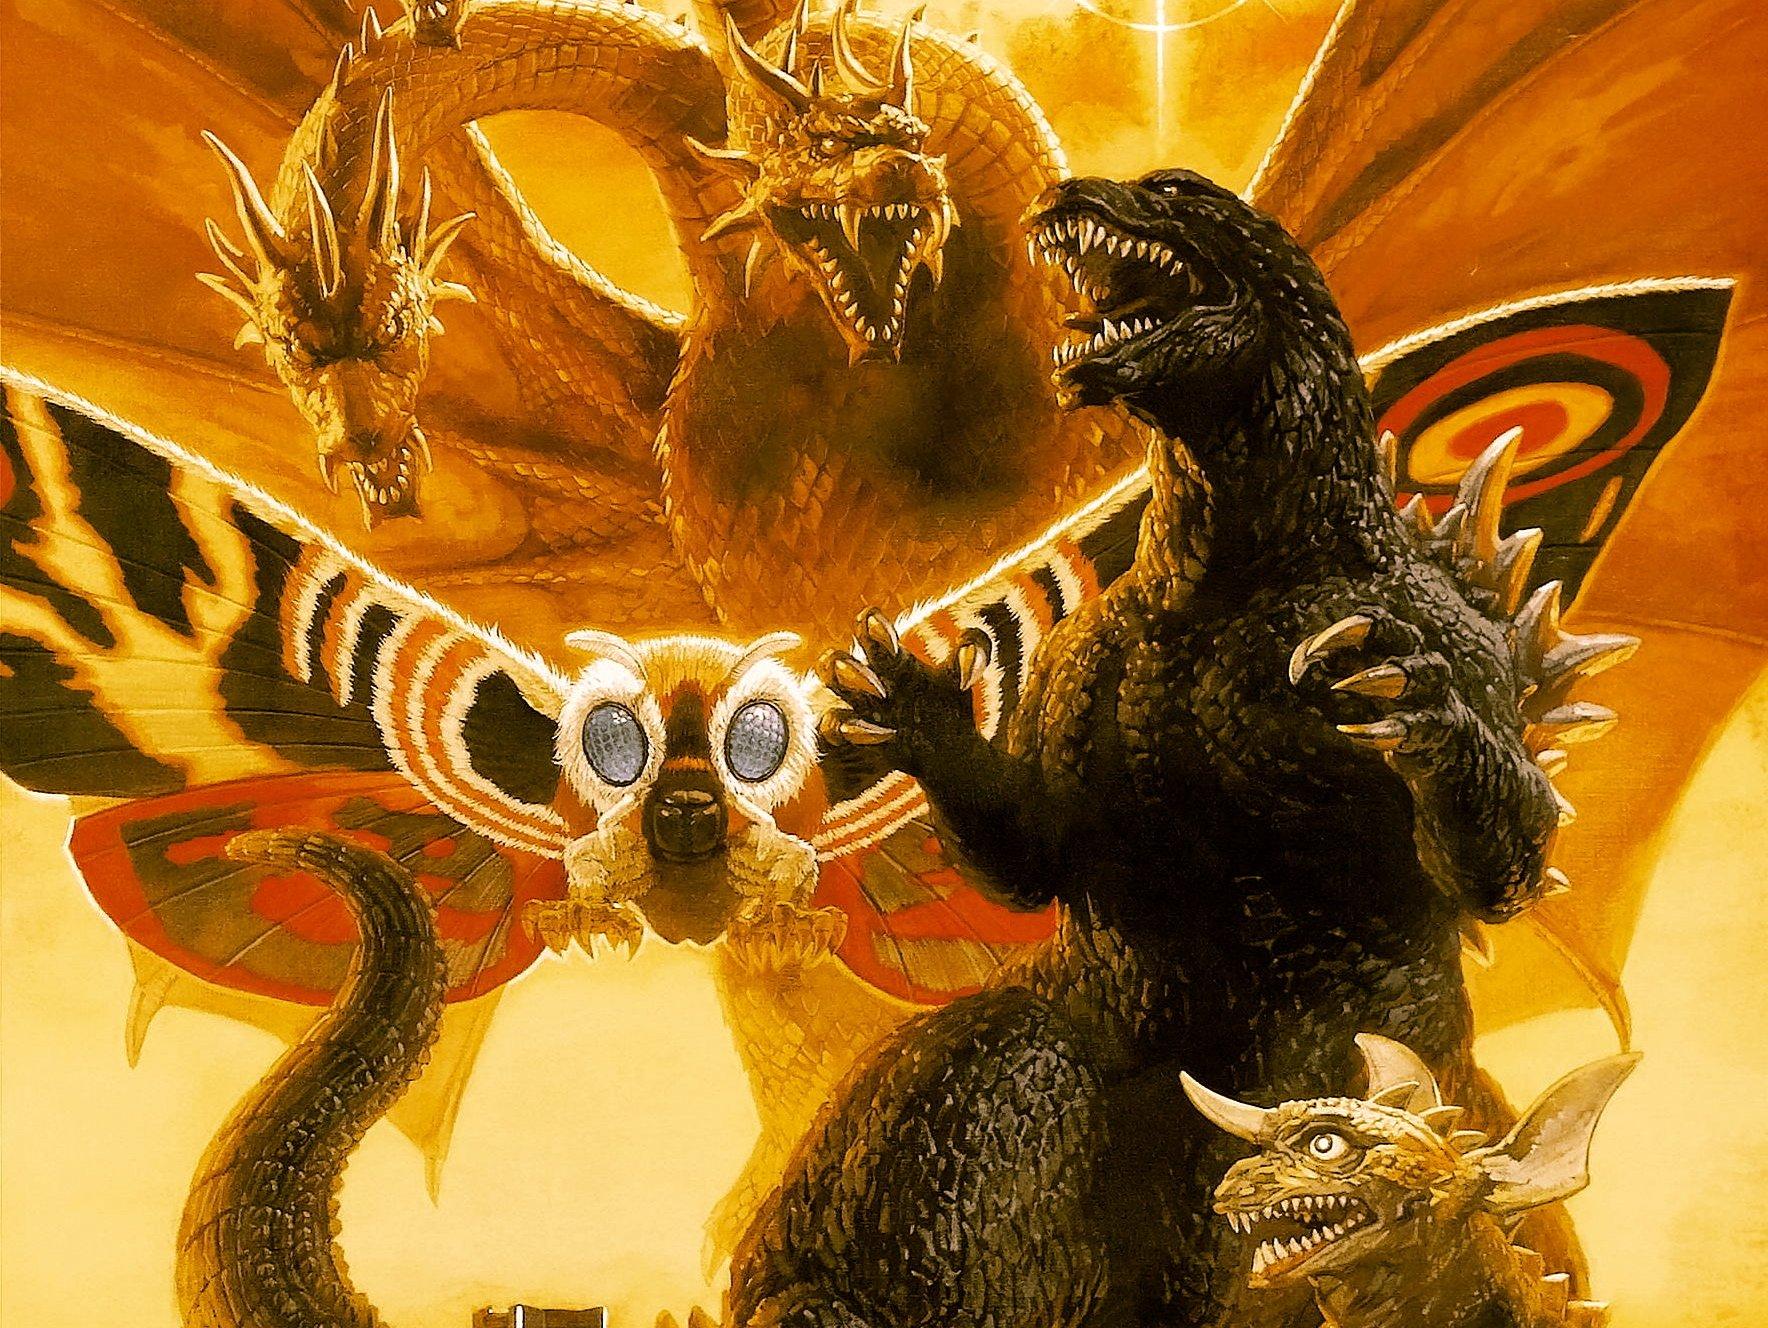 Godzilla vs. King Ghidorah Wallpapers and Backgrounds Image.